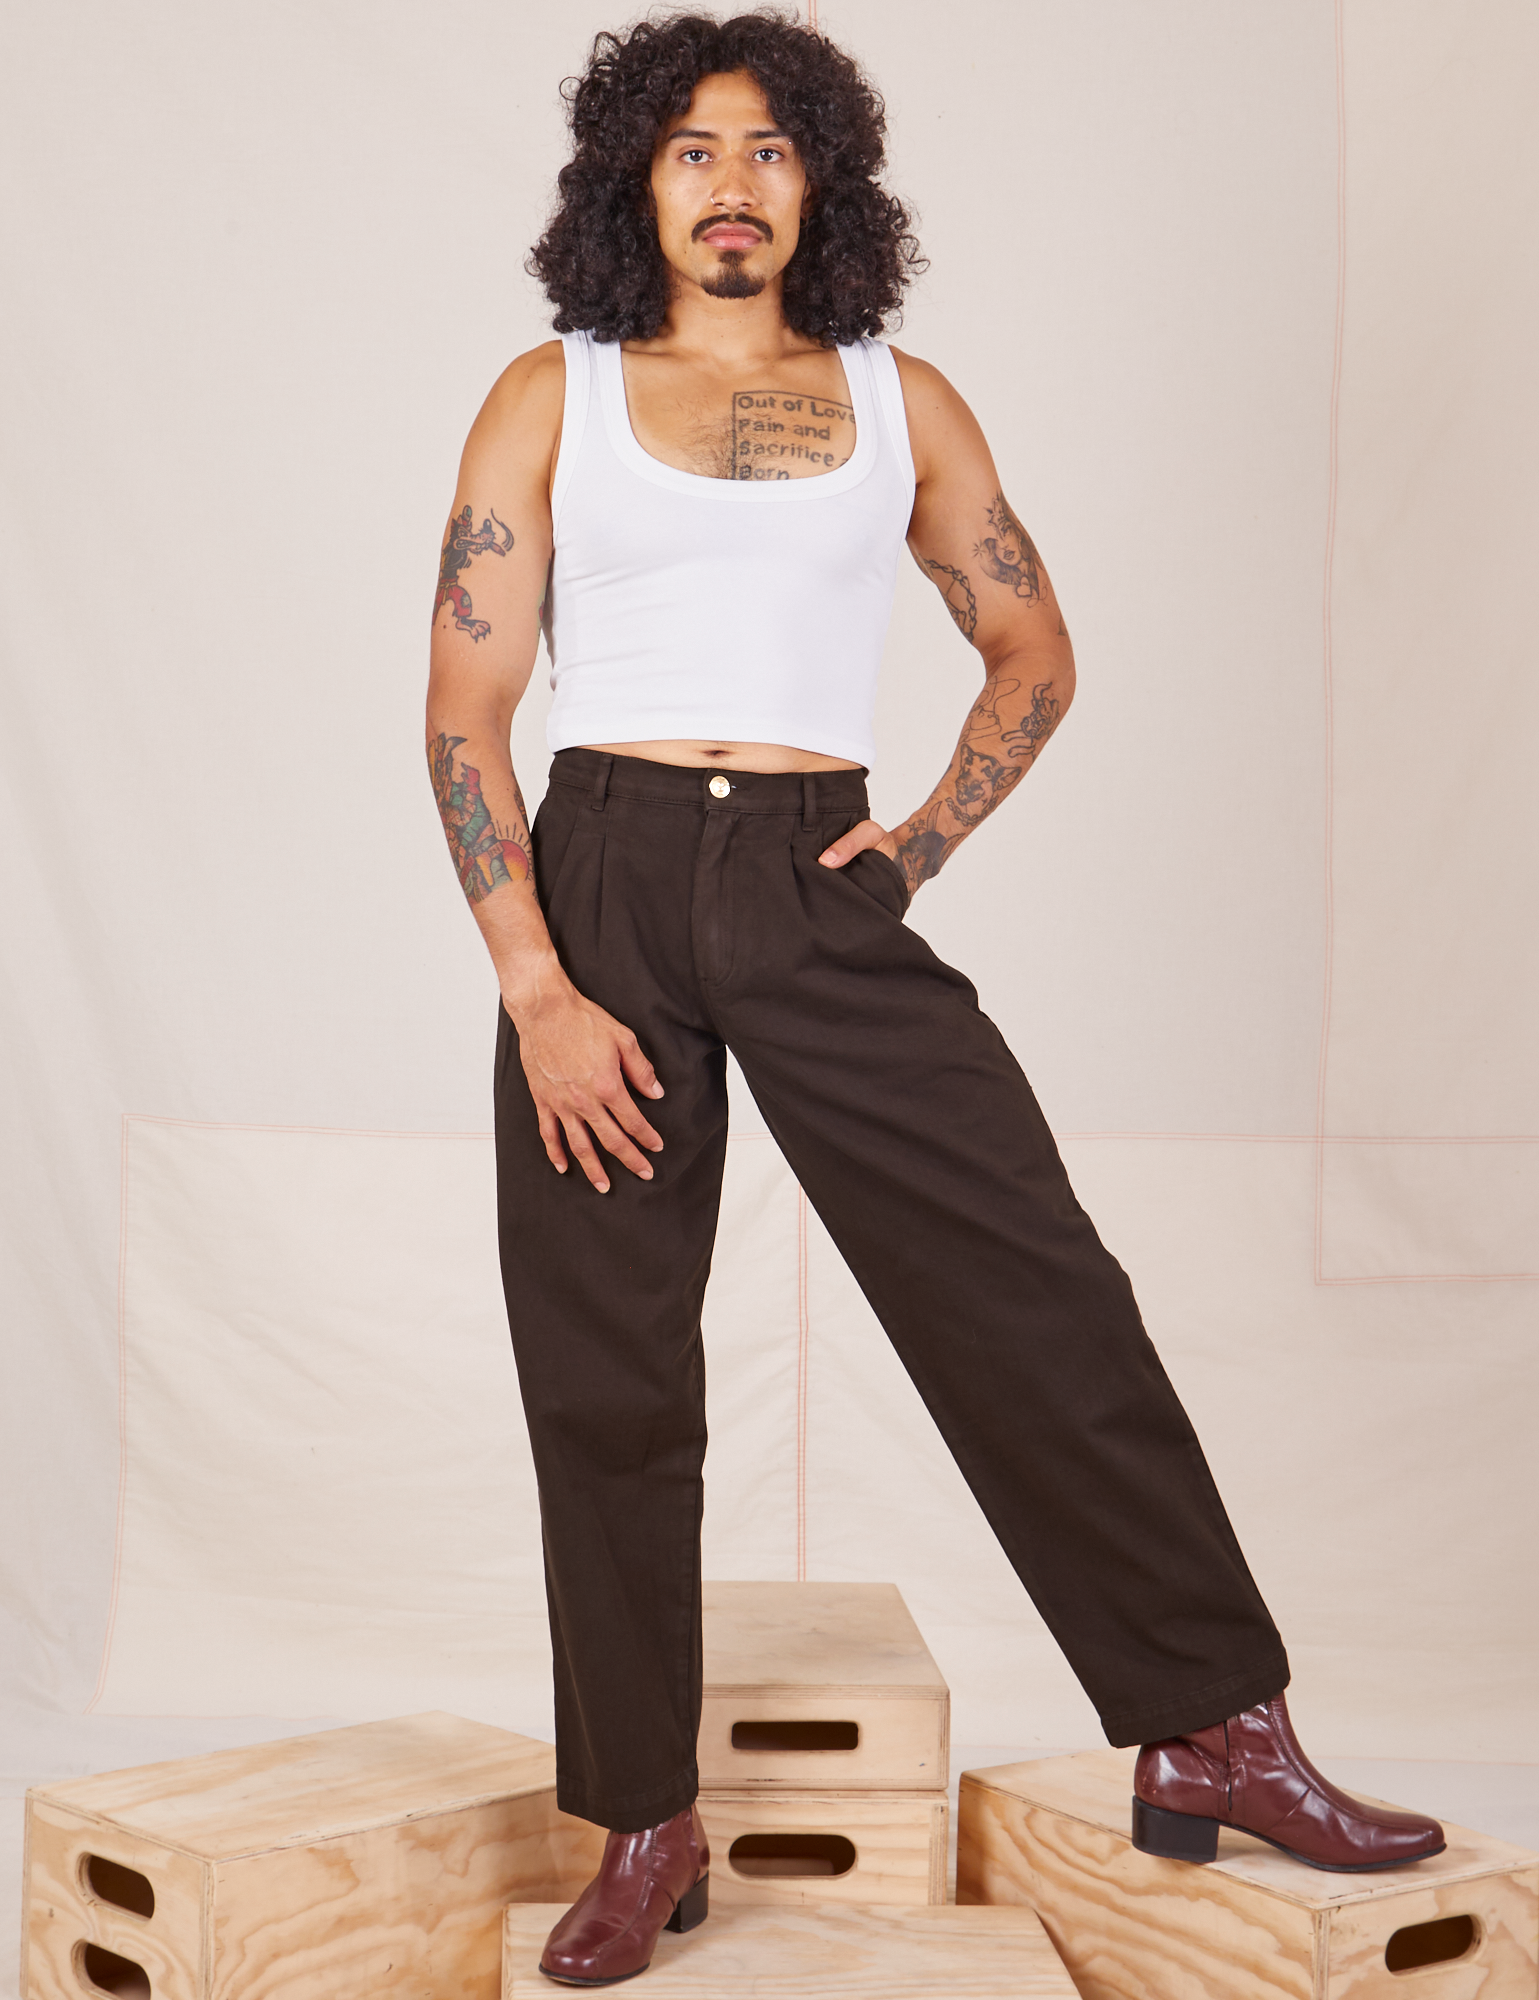 Jesse is 5&#39;8&quot; and wearing XXS Heavyweight Trousers in Espresso Brown paired with vintage off-white Cropped Tank Top